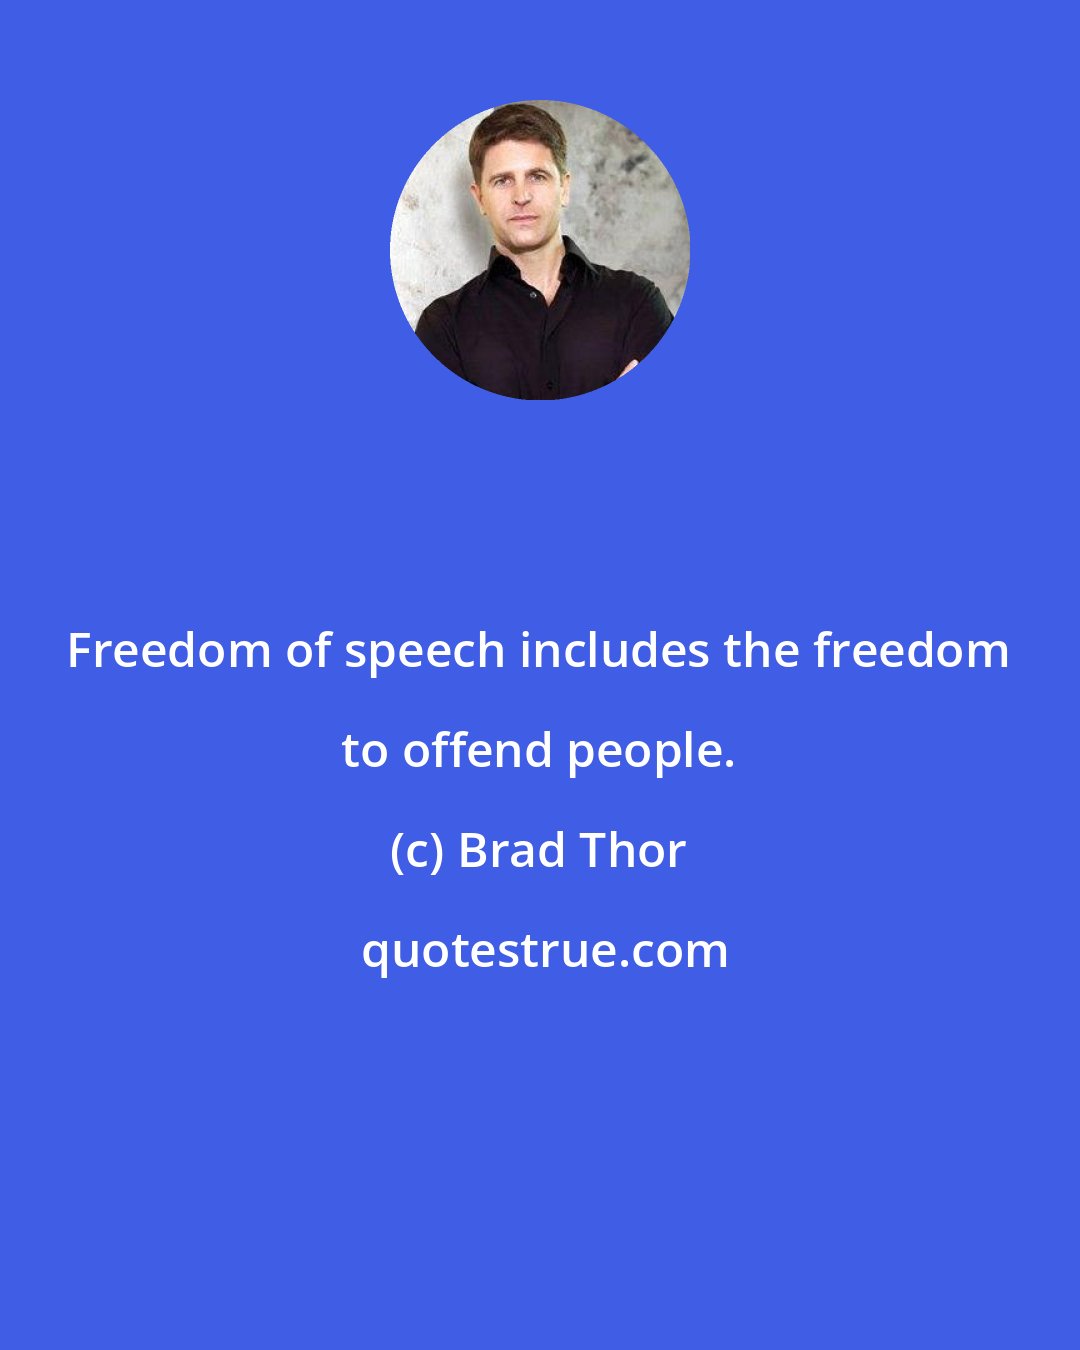 Brad Thor: Freedom of speech includes the freedom to offend people.